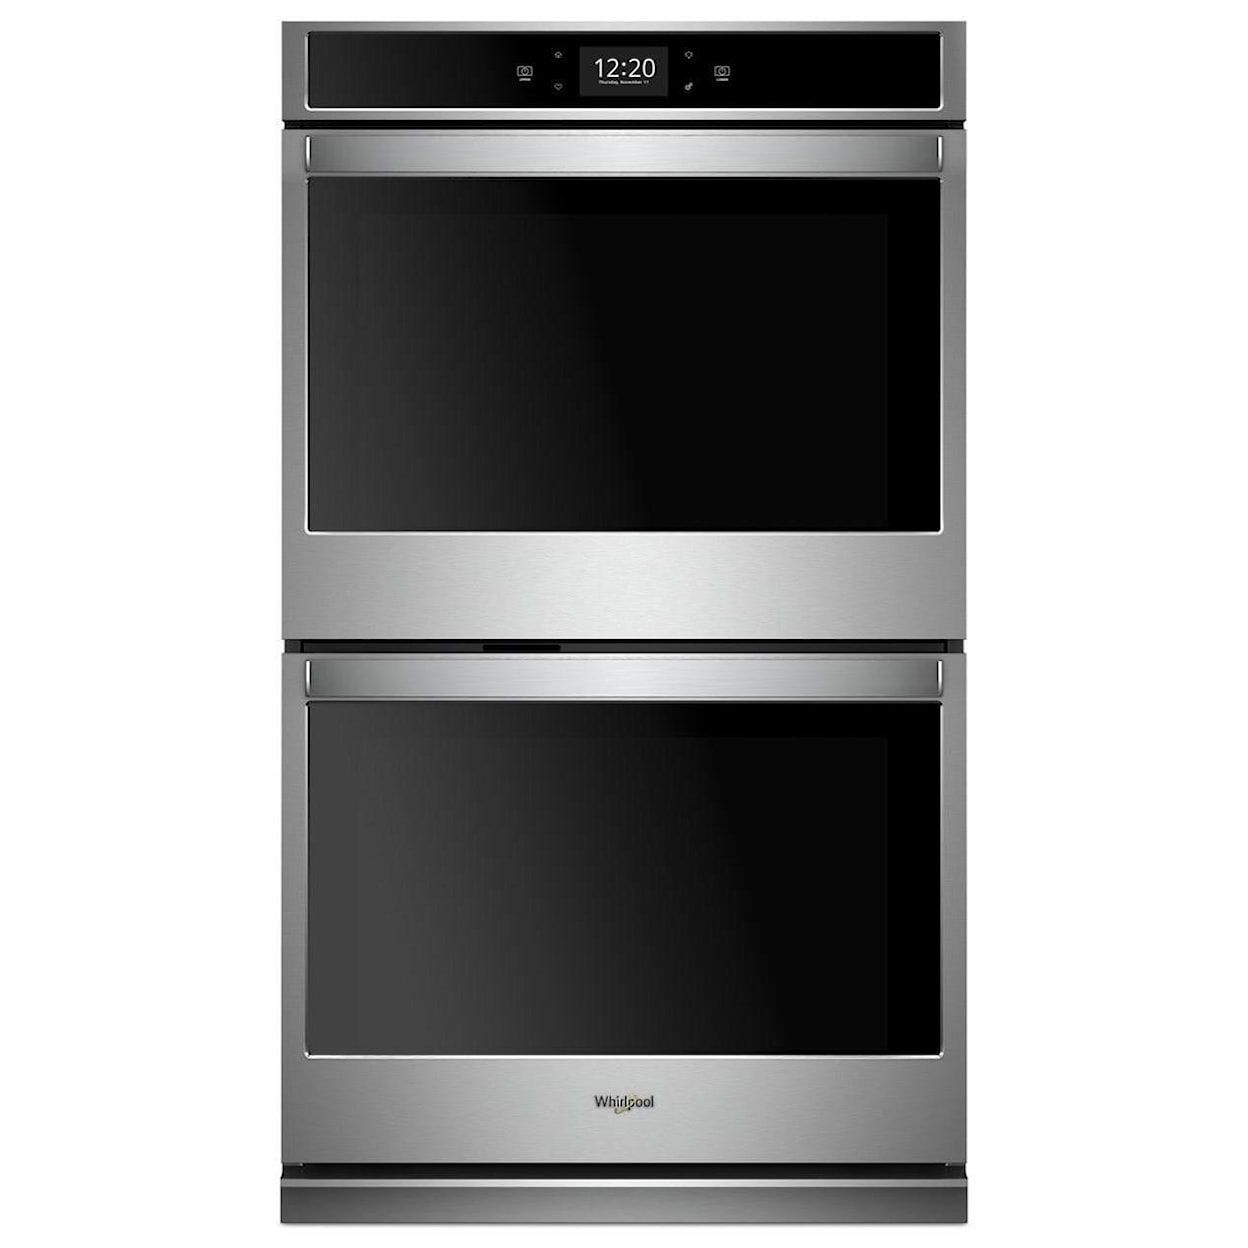 Whirlpool Electric Wall Ovens - Whirlpool 10.0 cu. ft. Smart Double Wall Oven